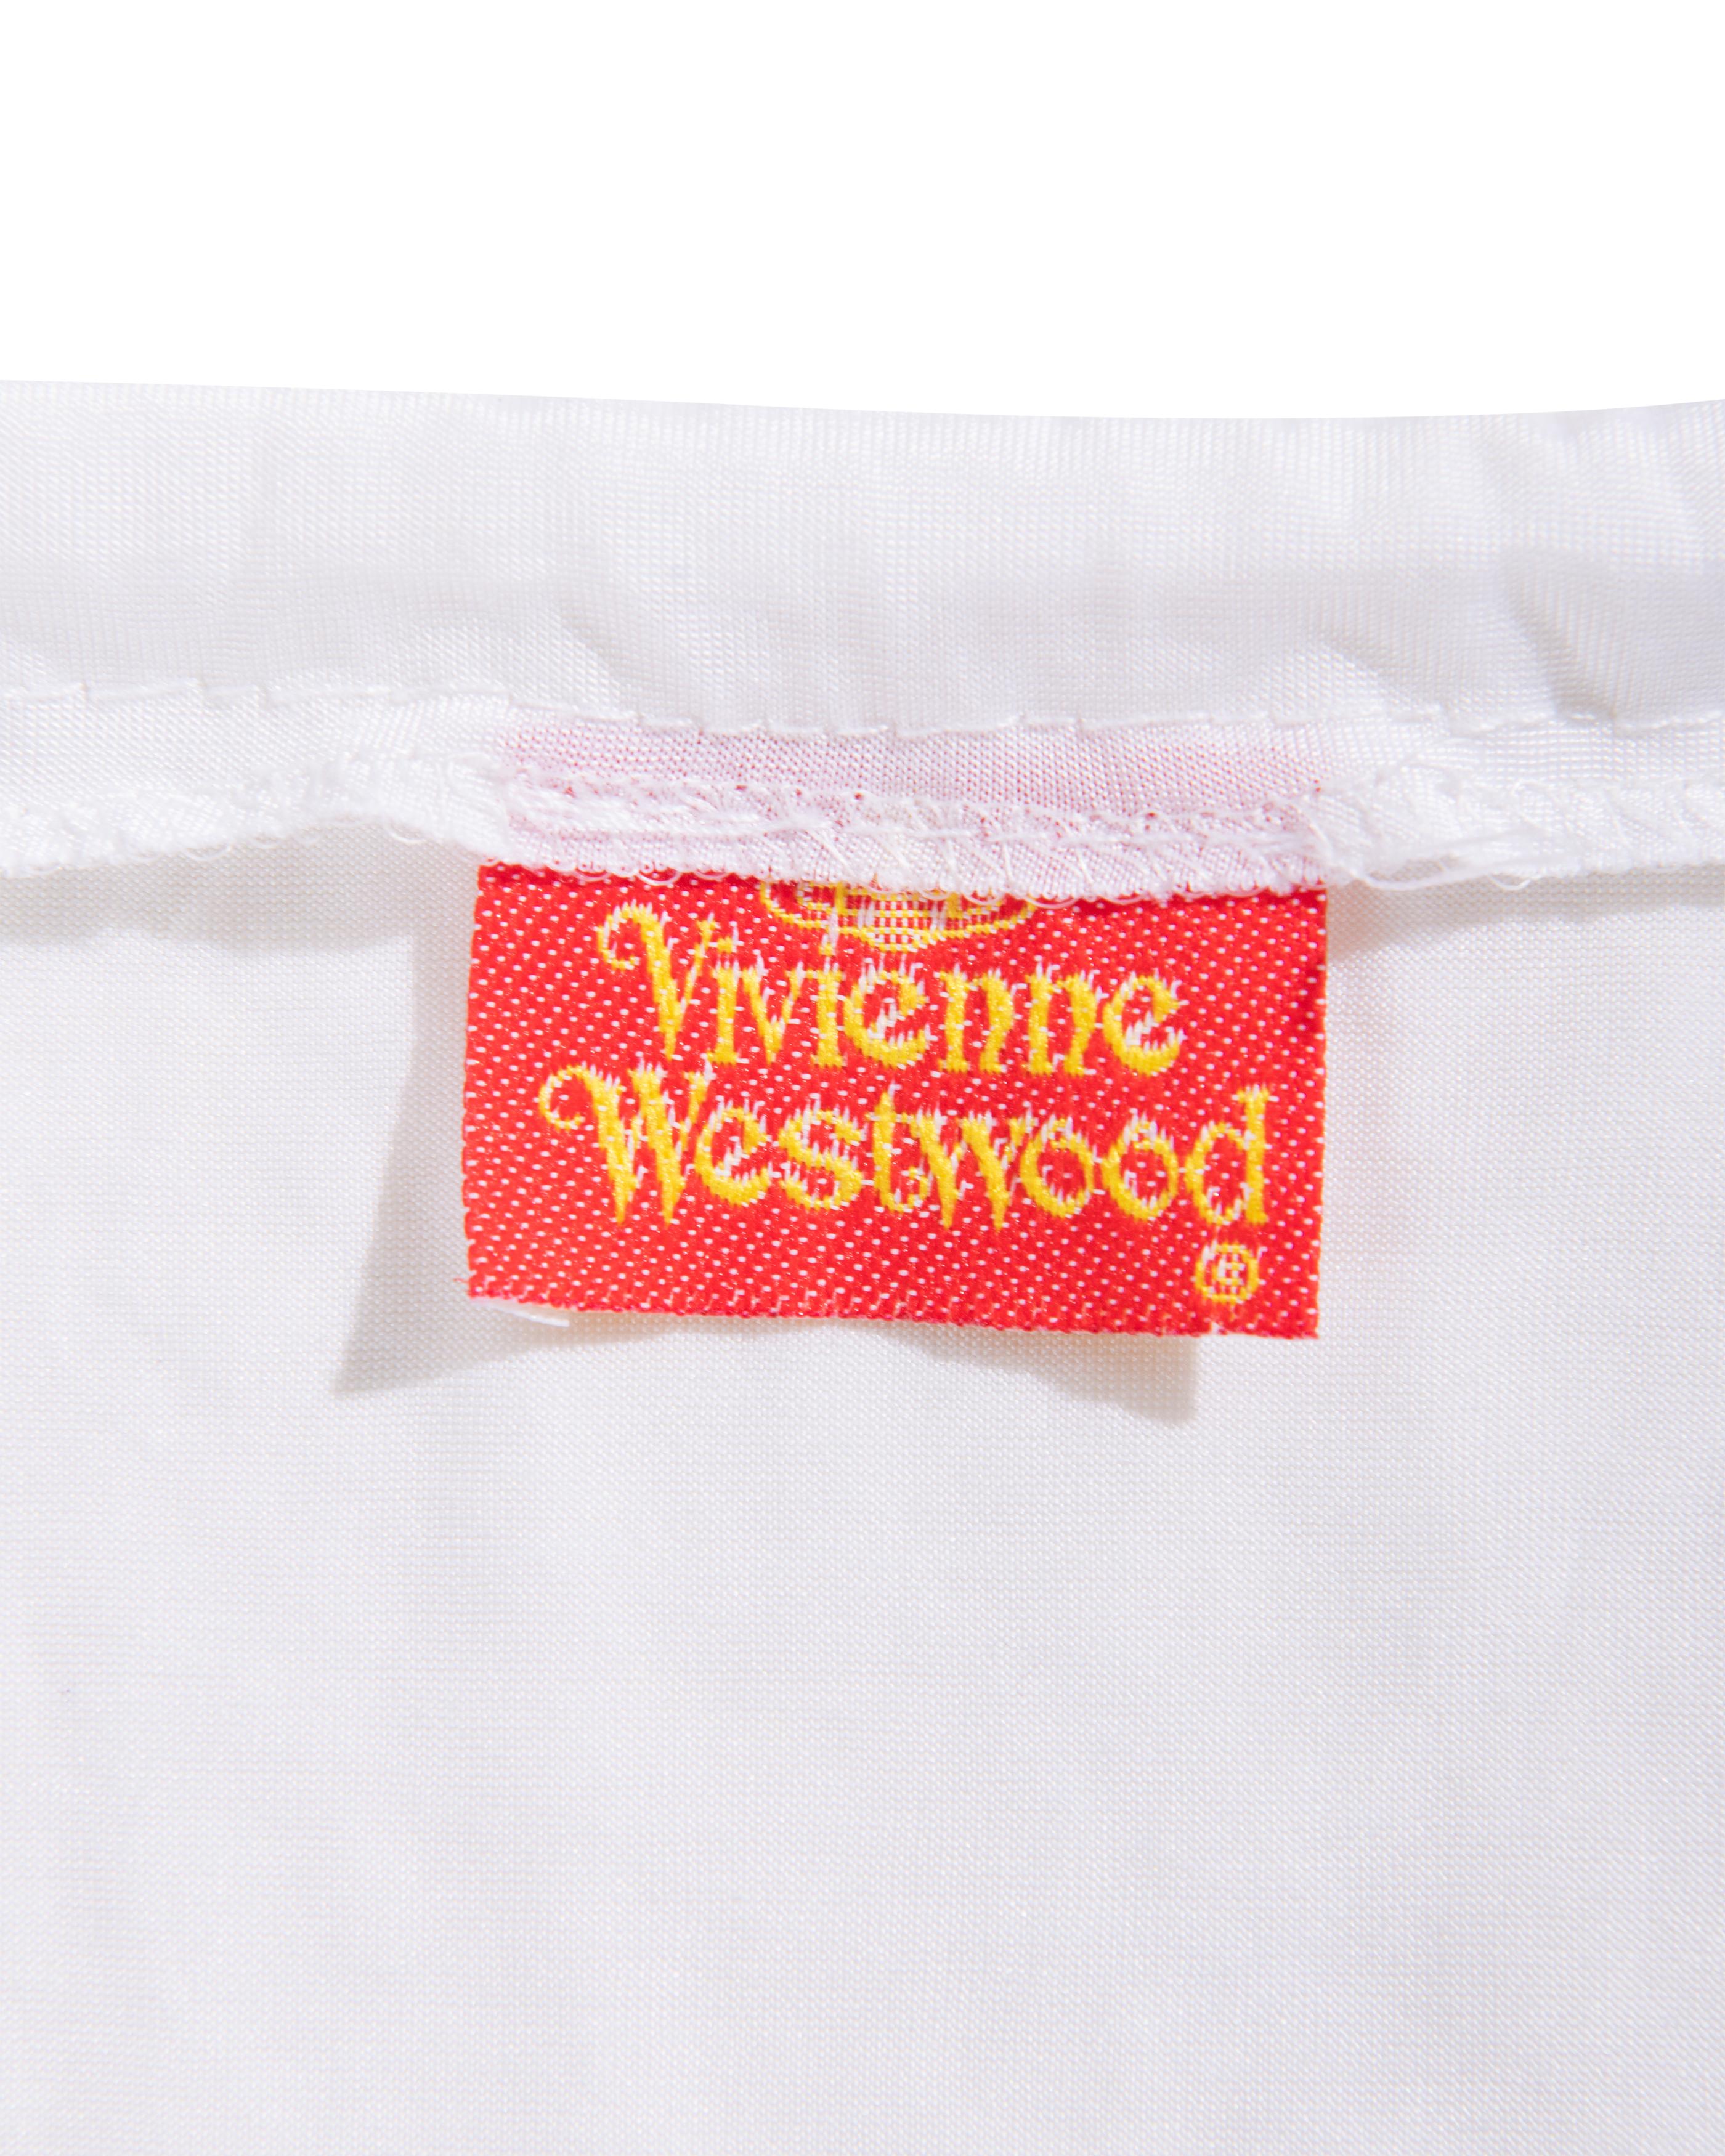 S/S 1988 Vivienne Westwood White Mini Skirt with Removable Bustle For Sale 7